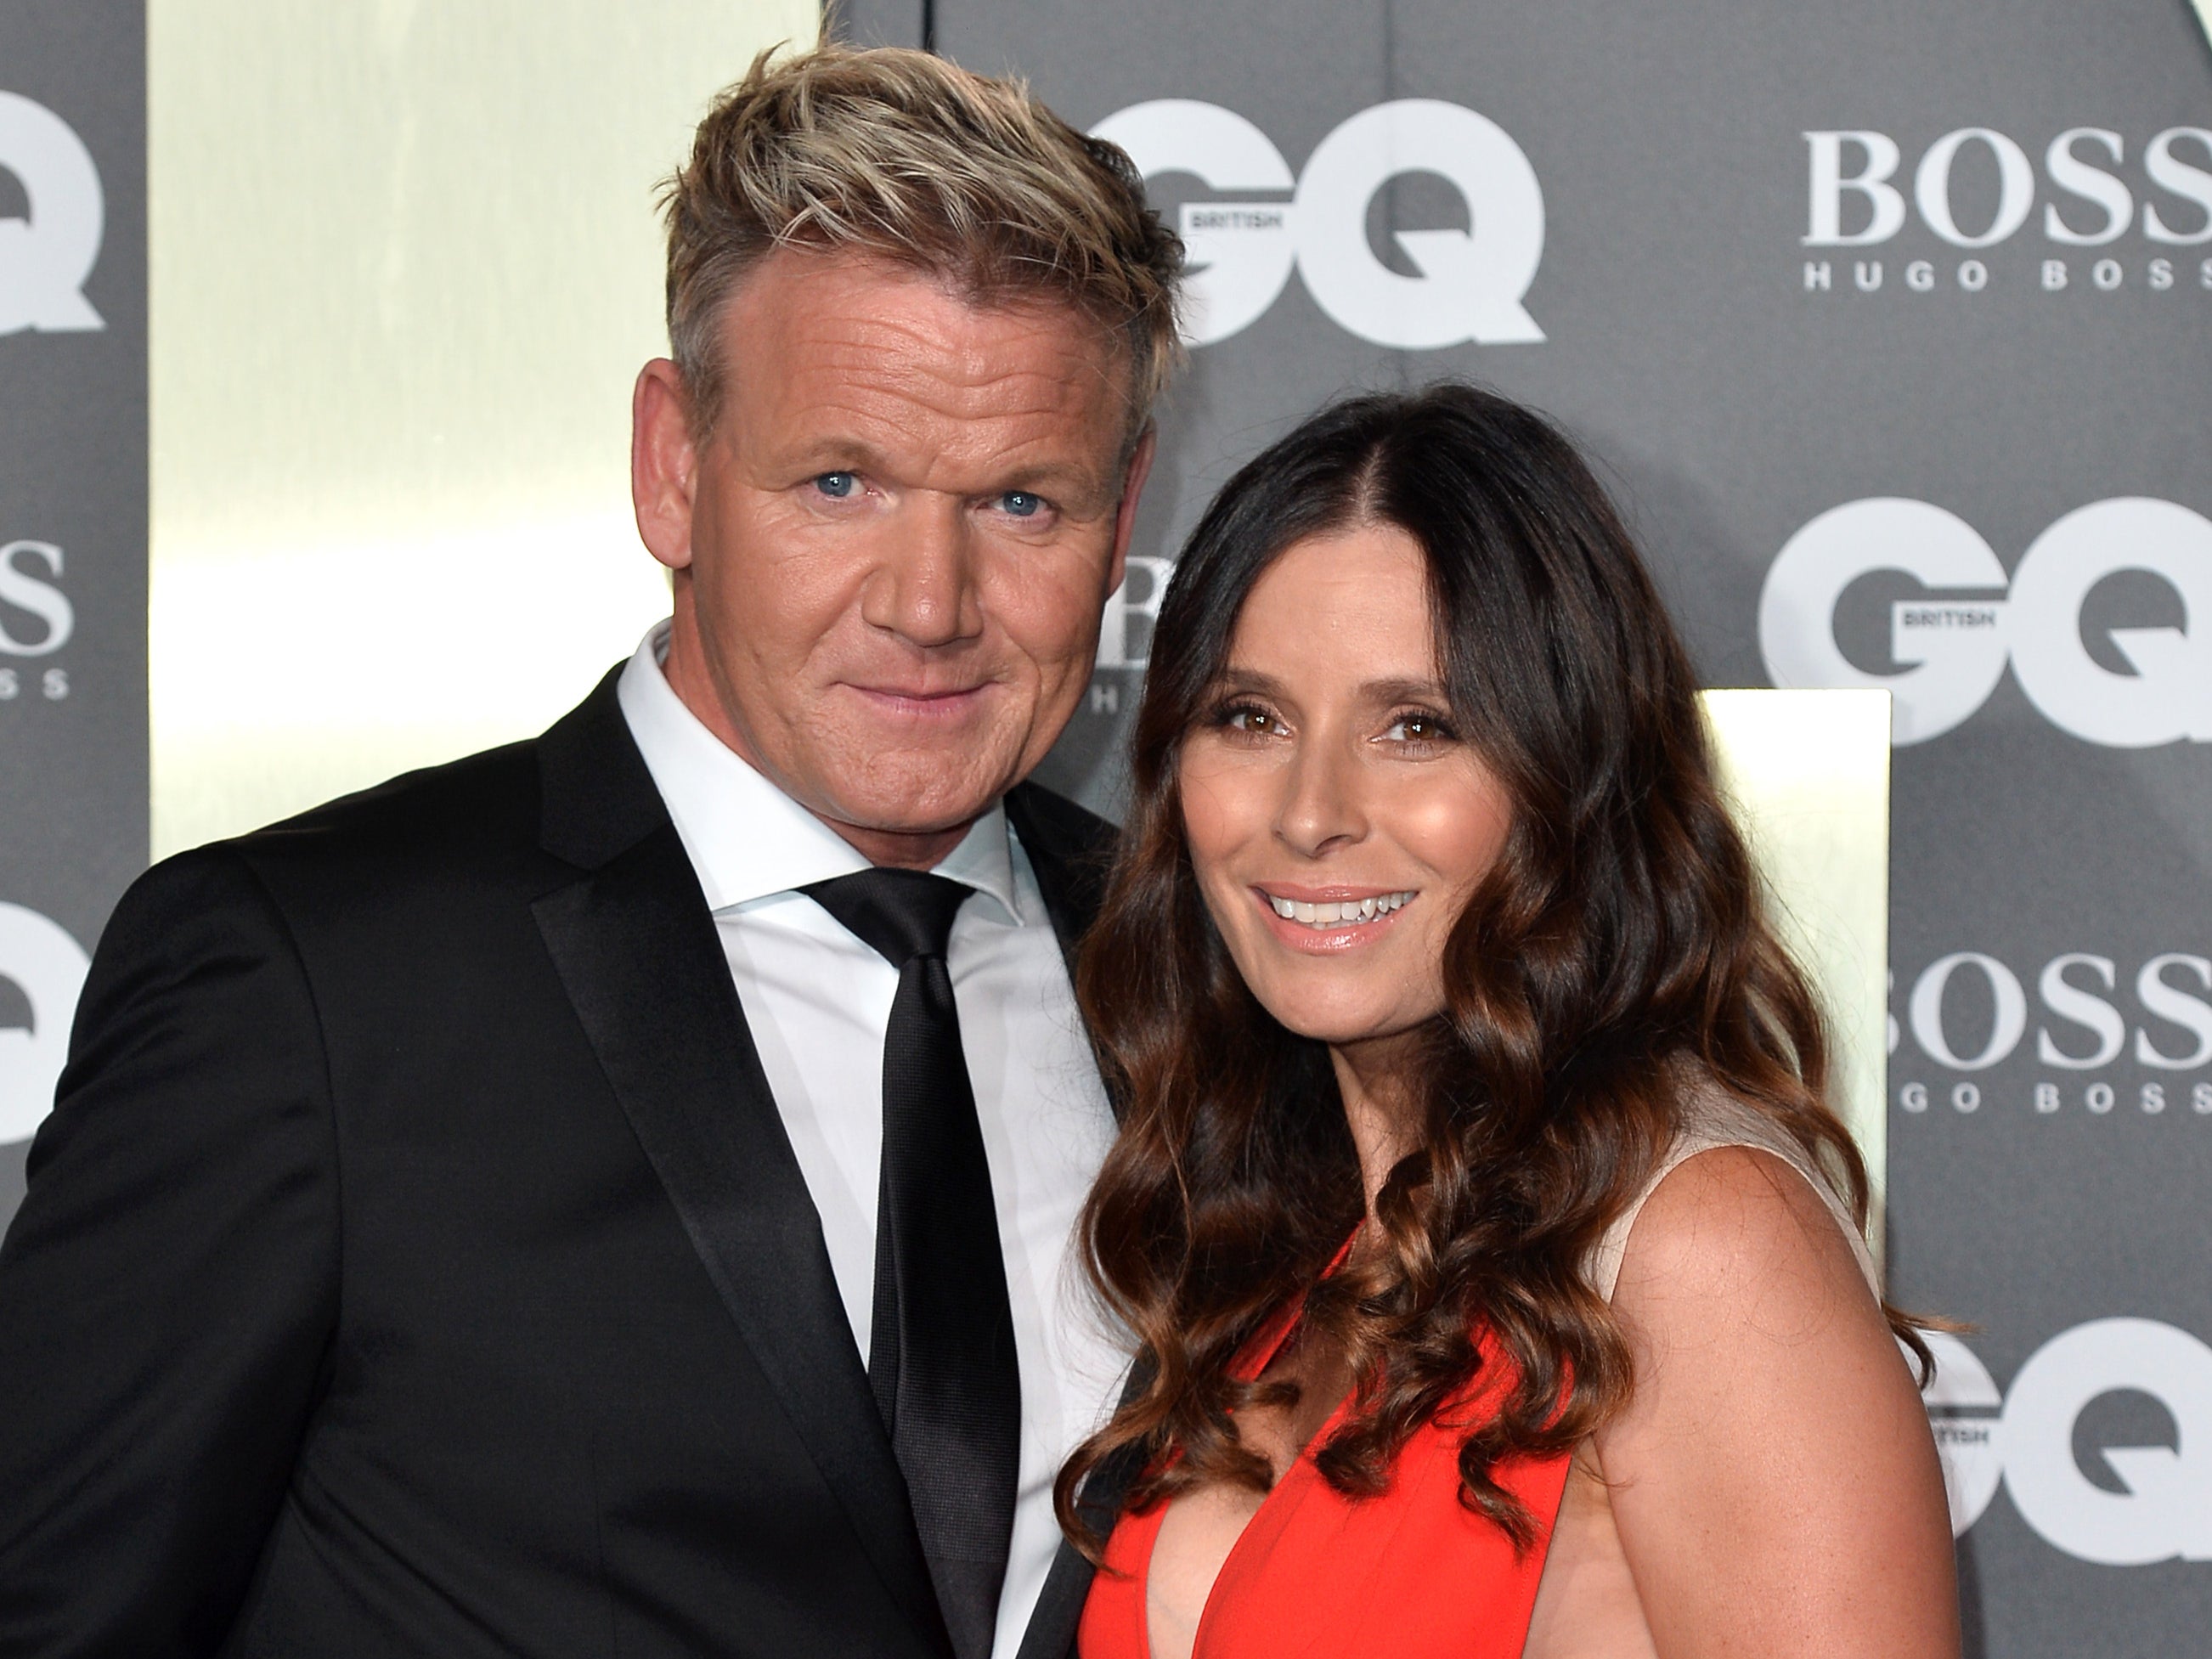 Tana Ramsay and Gordon Ramsay attend the GQ Men Of The Year Awards 2019 at Tate Modern on 3 September 2019 in London, England (Jeff Spicer/Getty Images)